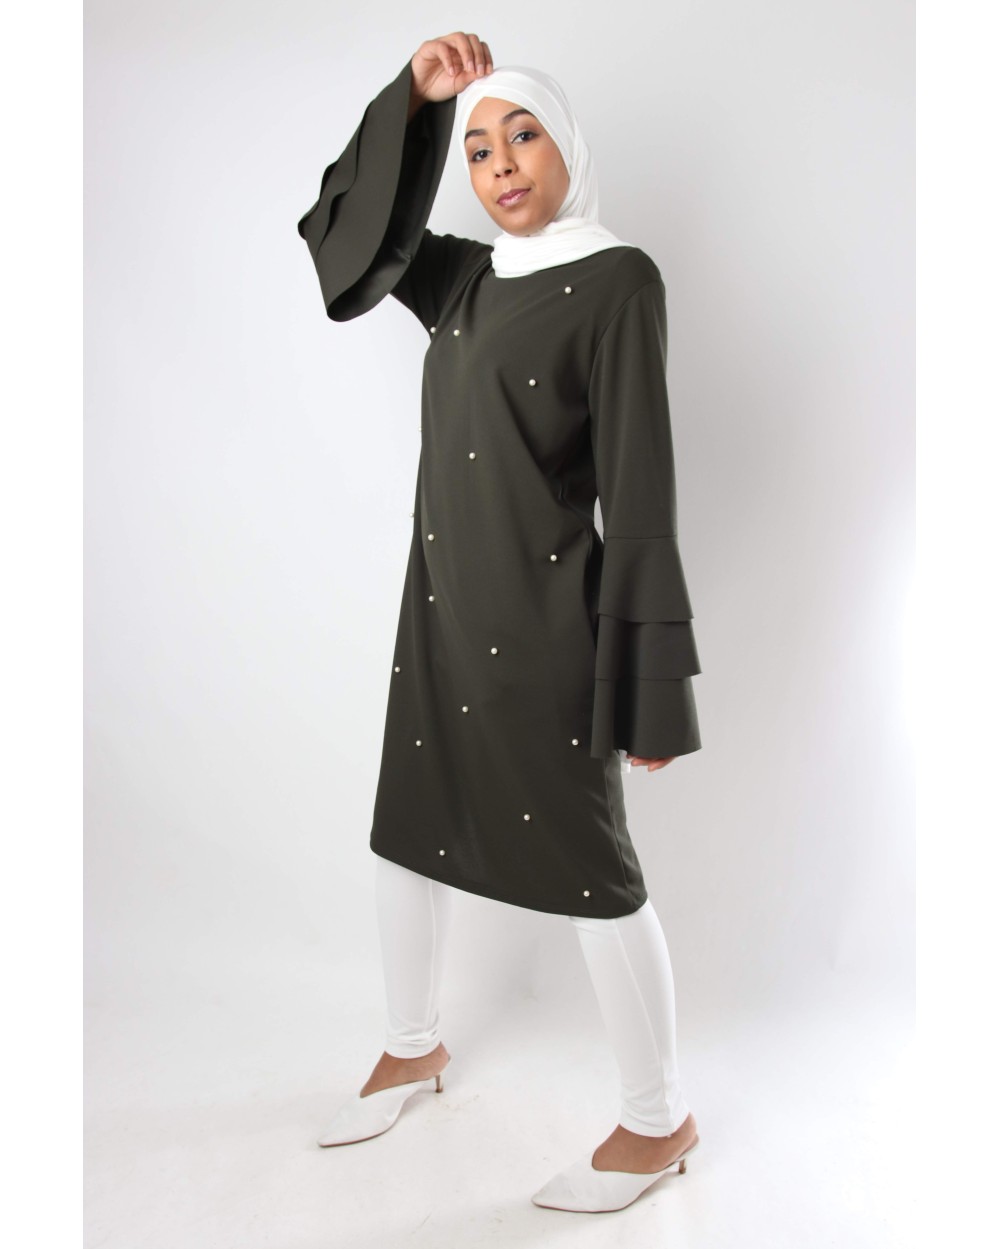 Bella tunic with 3 flying sleeves